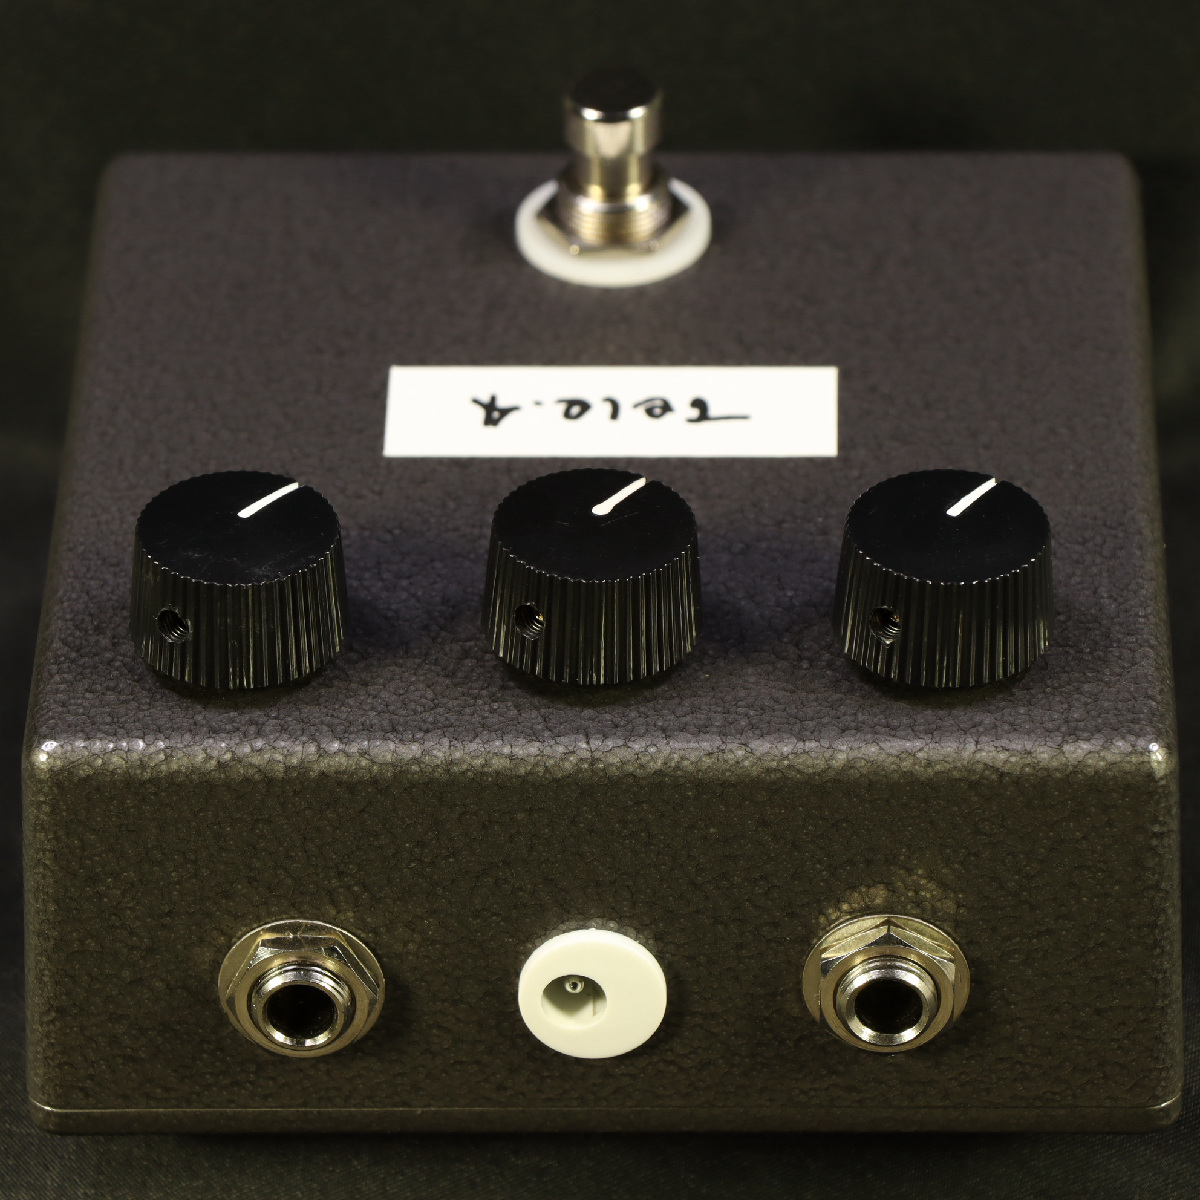 Tele.4 amplifier Tele.4 pedal Overdrive/Booster オーバードライブ